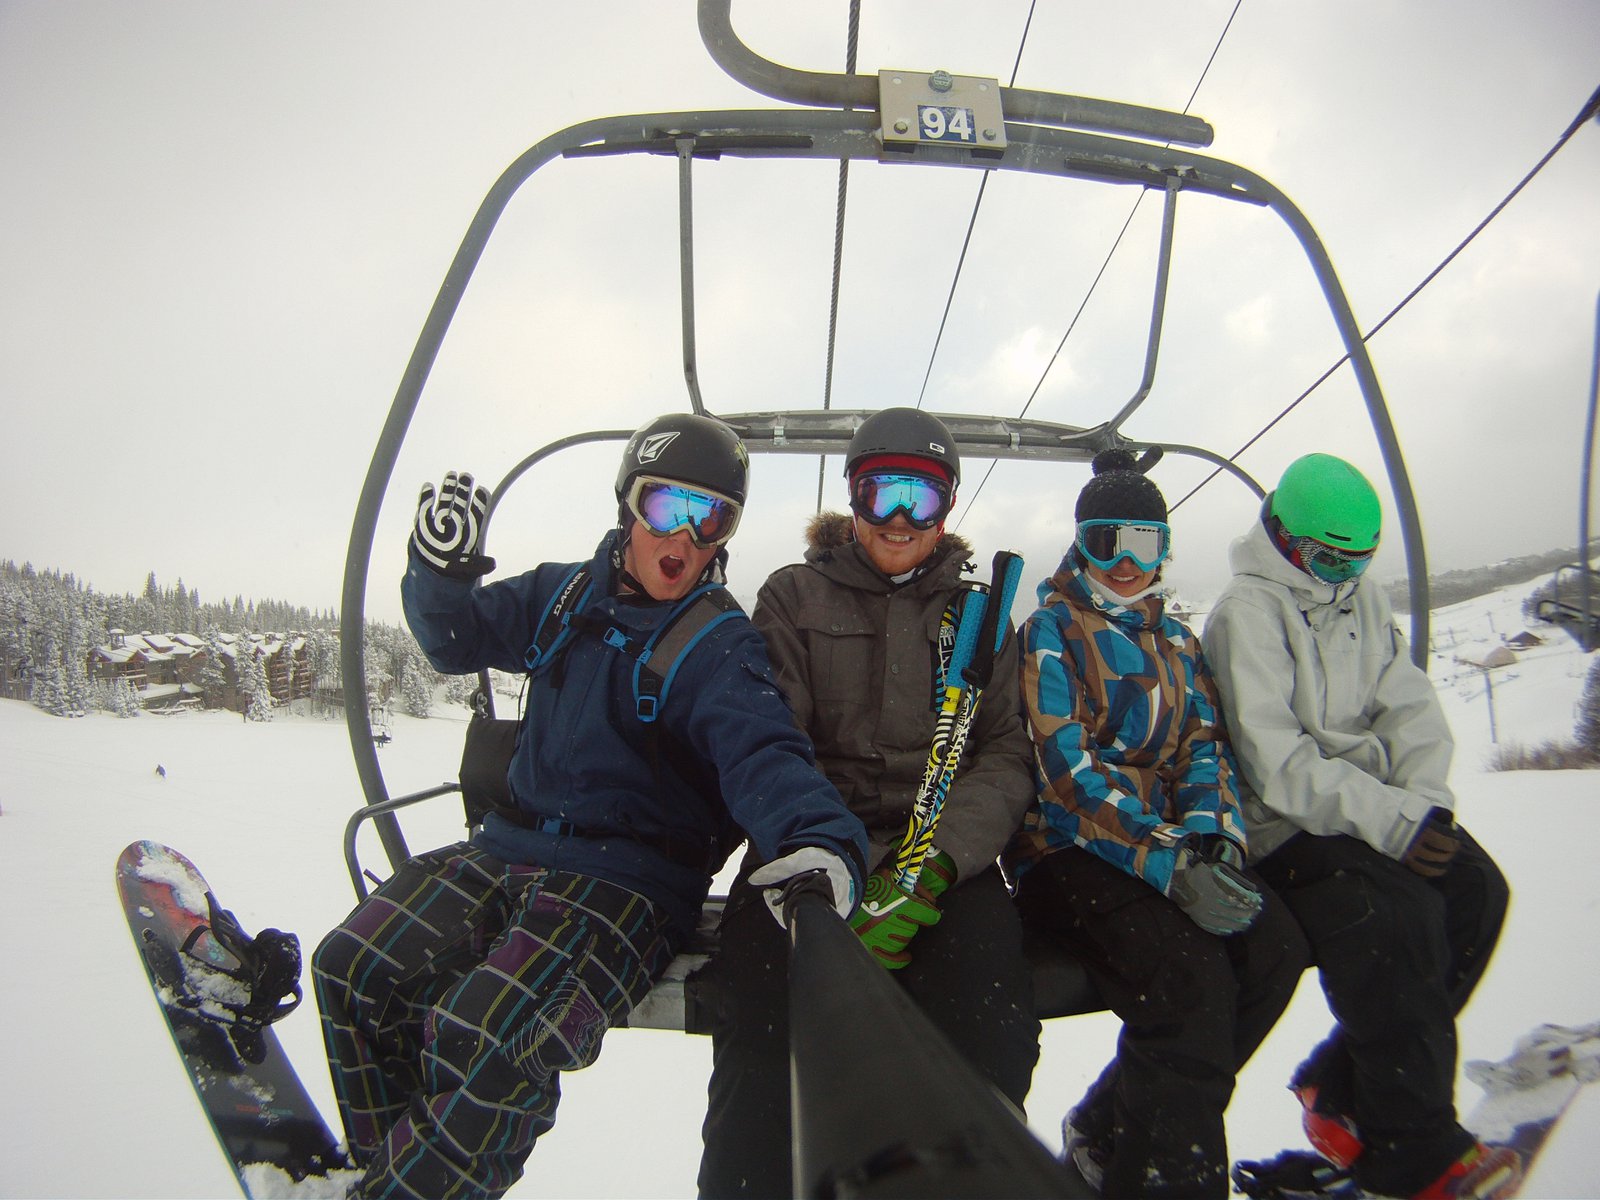 Early Season at Breck with the Roomies